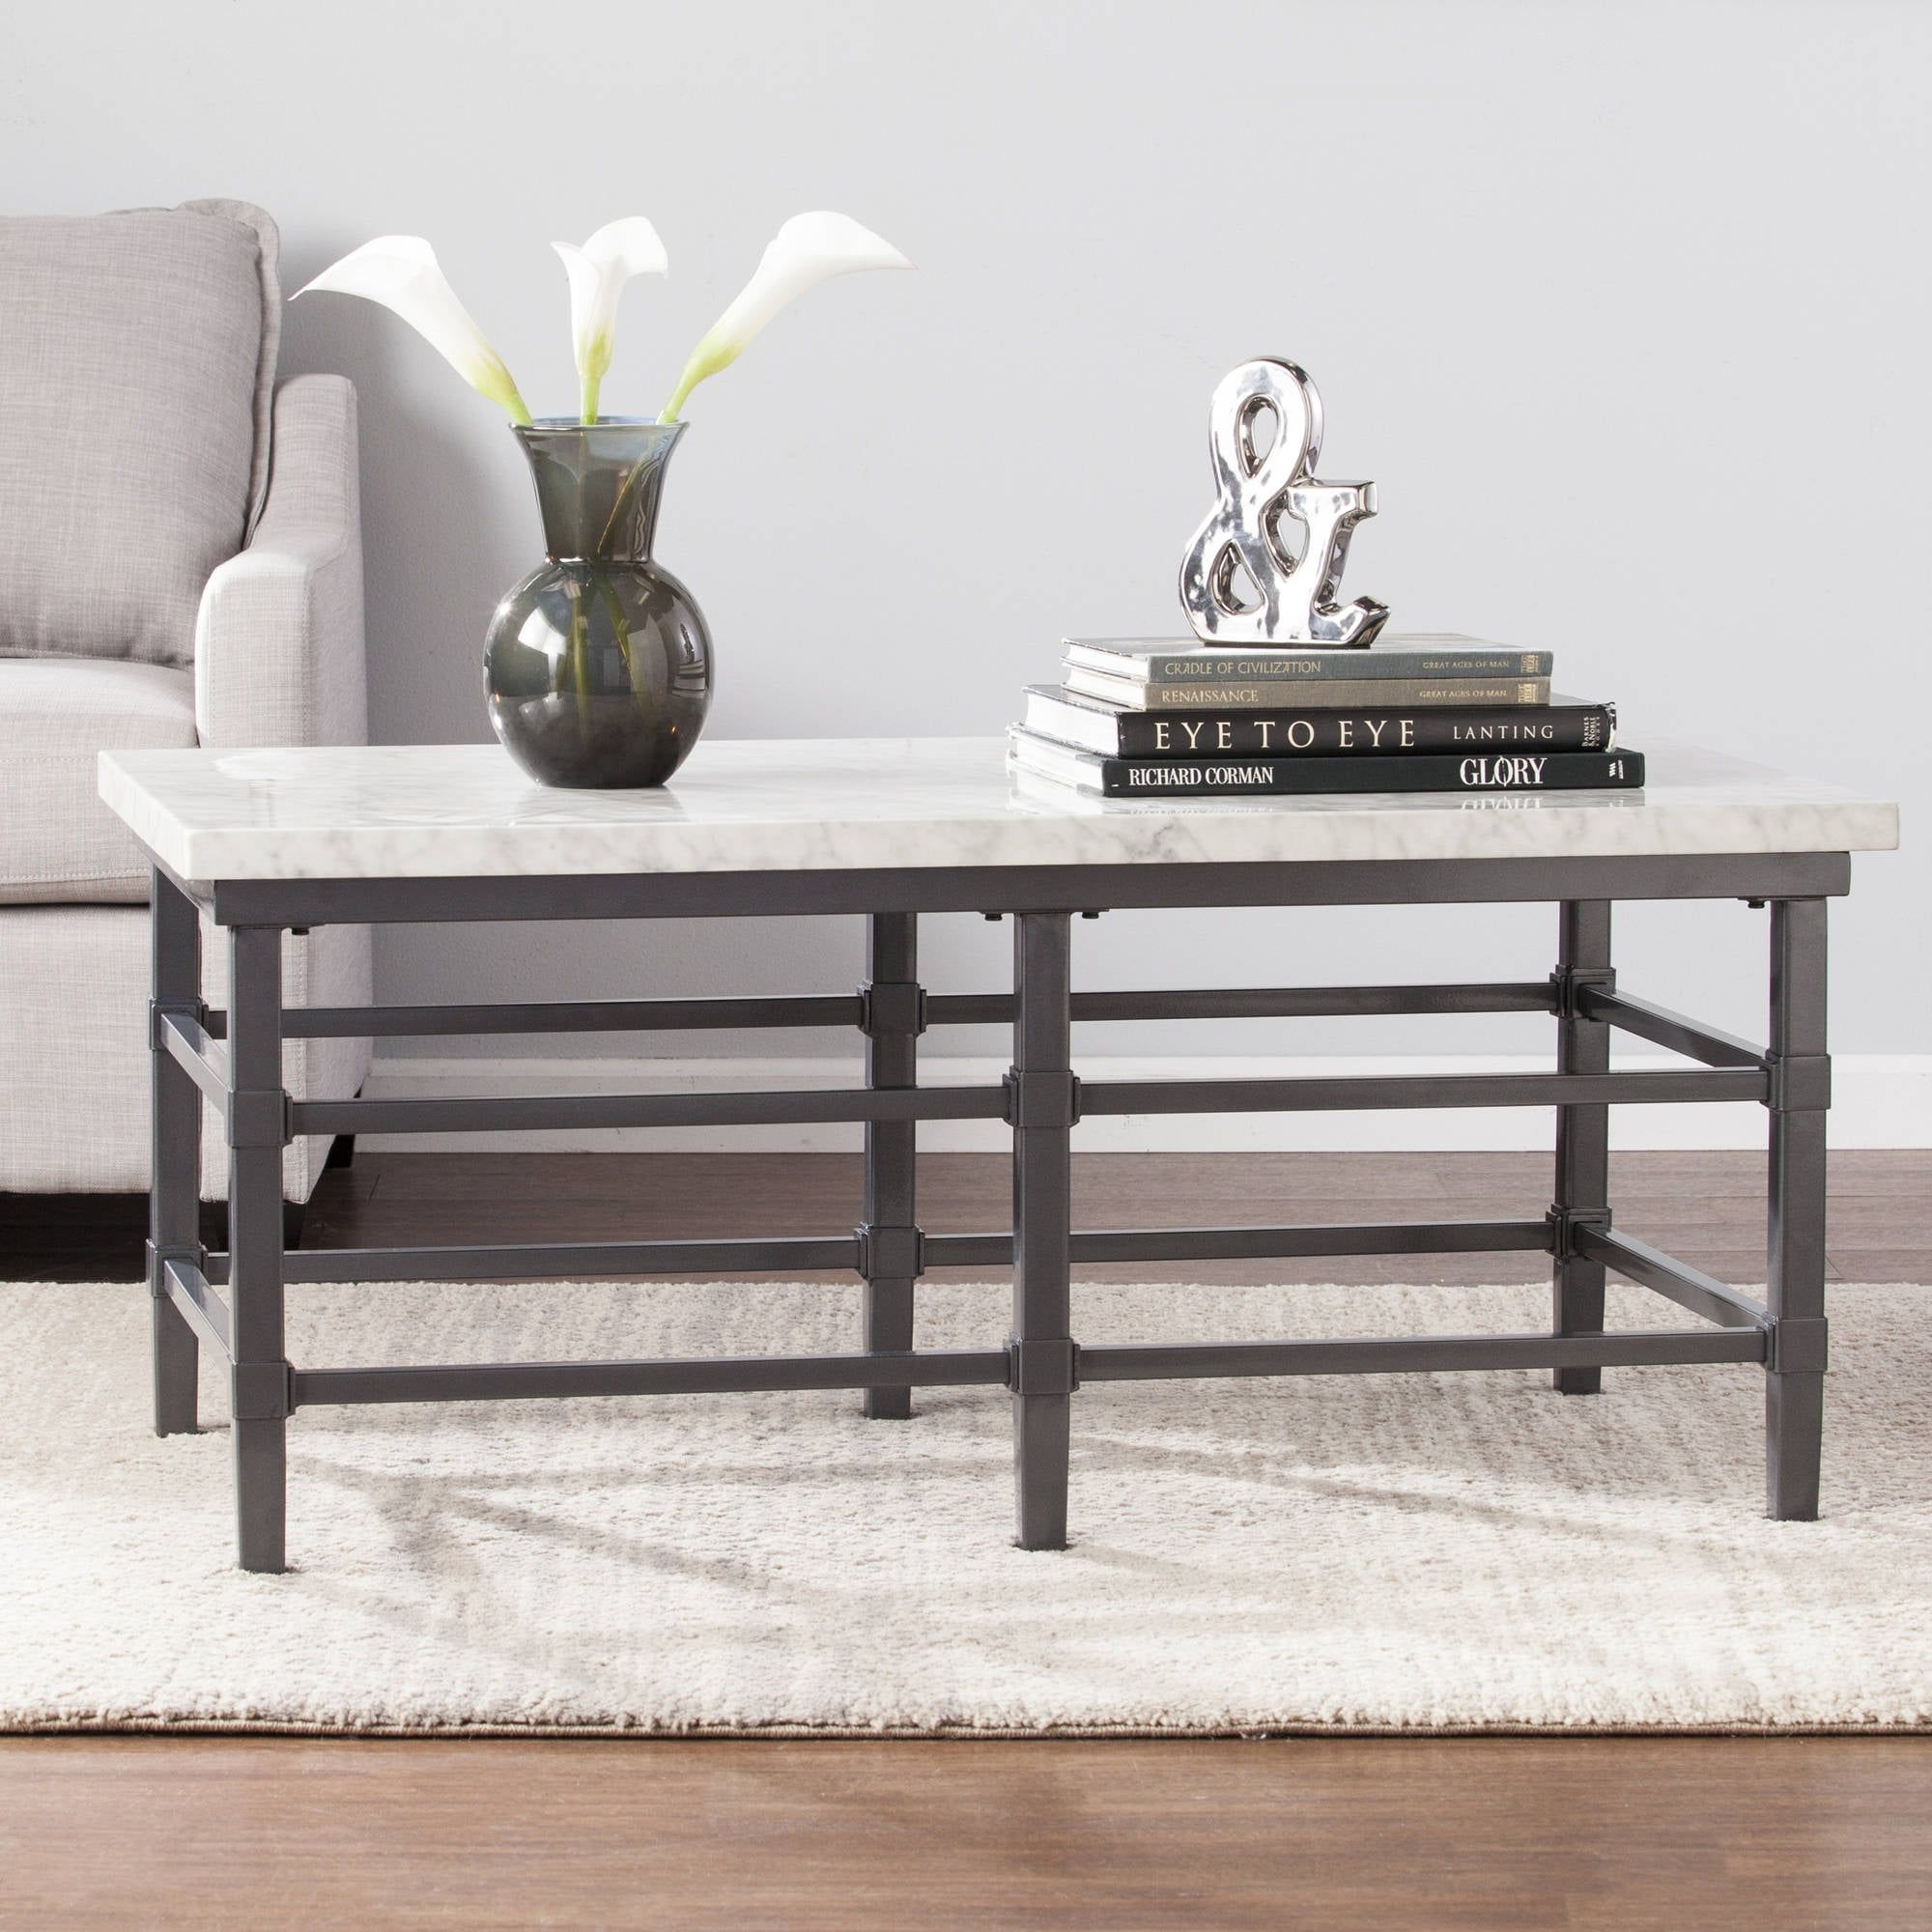 Southern Enterprises Trilane Faux Marble Coffee Table, Rustic Black Within Southern Enterprises Larksmill Coffee Tables (Gallery 10 of 20)